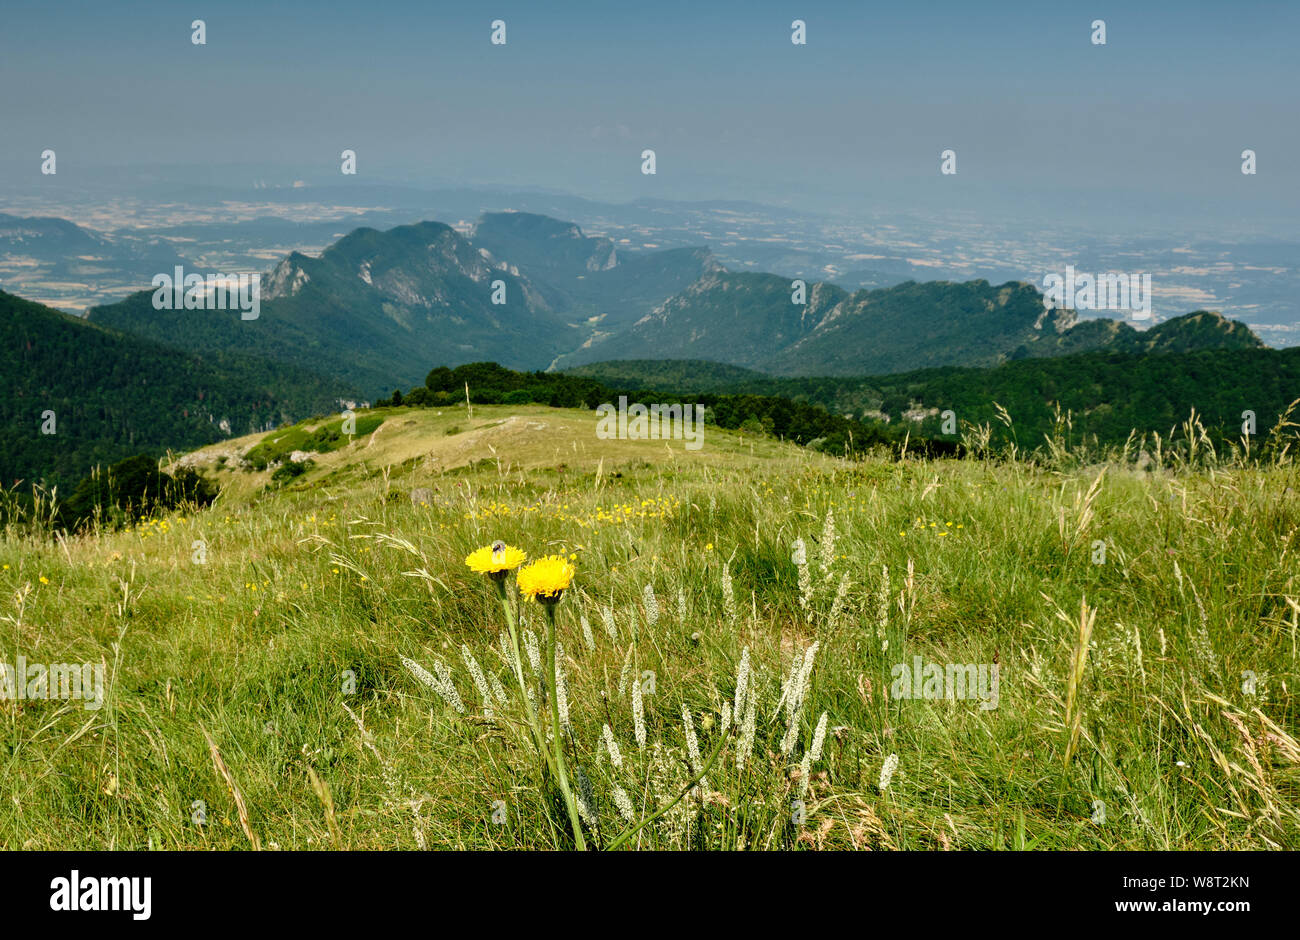 A meadow flower on Les Trois Becs, France. In the background is the bowl-shaped forest of Saou, one of Europe's best examples of a perched syncline. Stock Photo